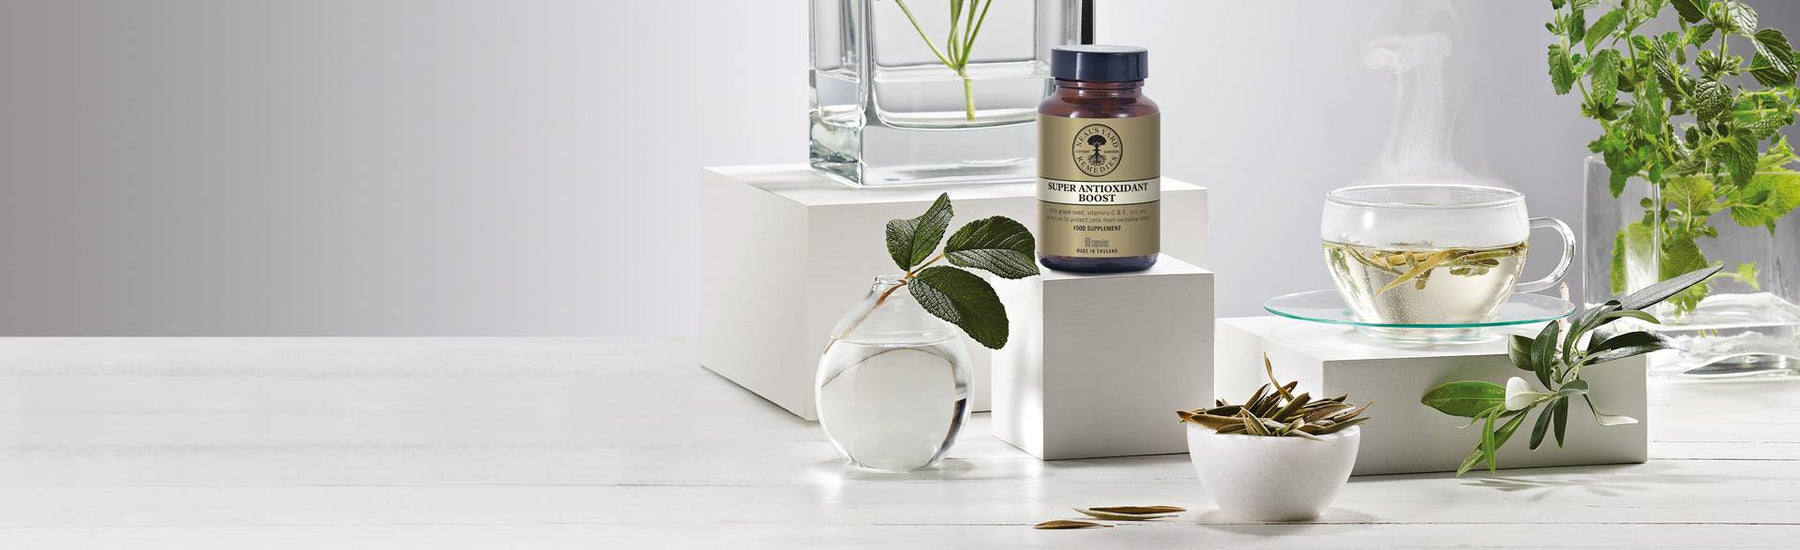 Picture of a supplement surrounded with glass decor and herbs by Neal's Yard Remedies